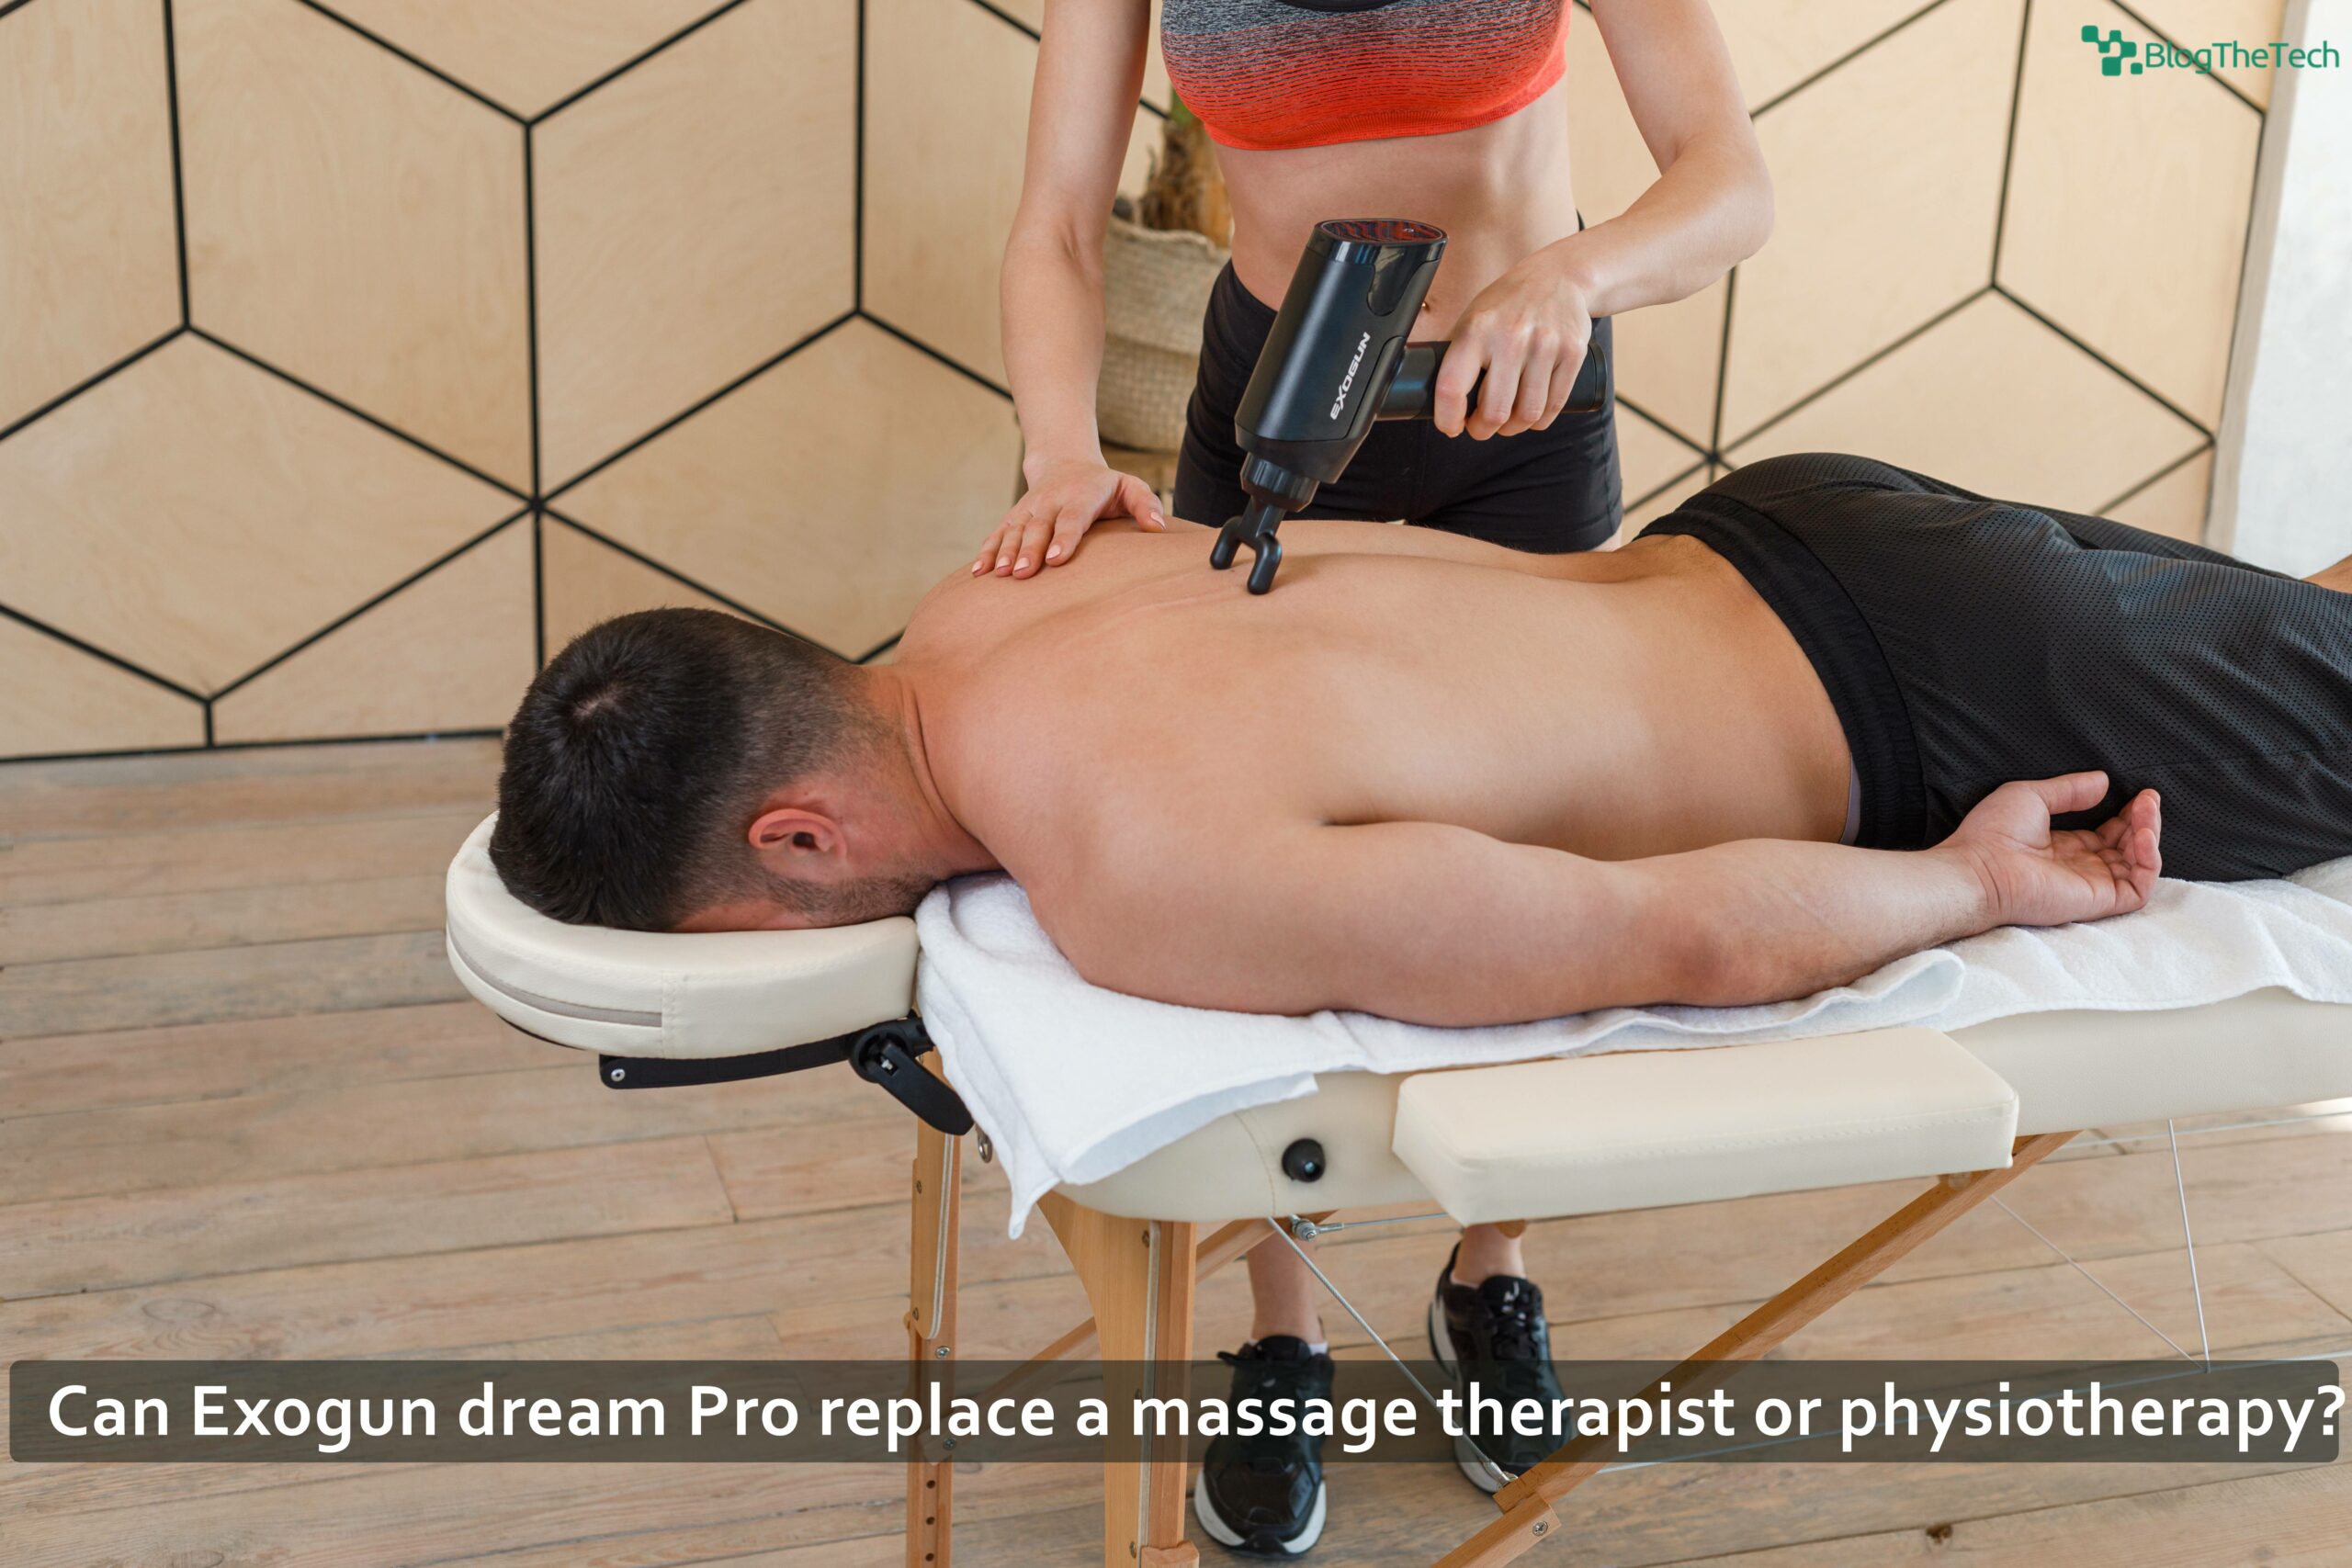 Can Exogun dream Pro replace a massage therapist or physiotherapy